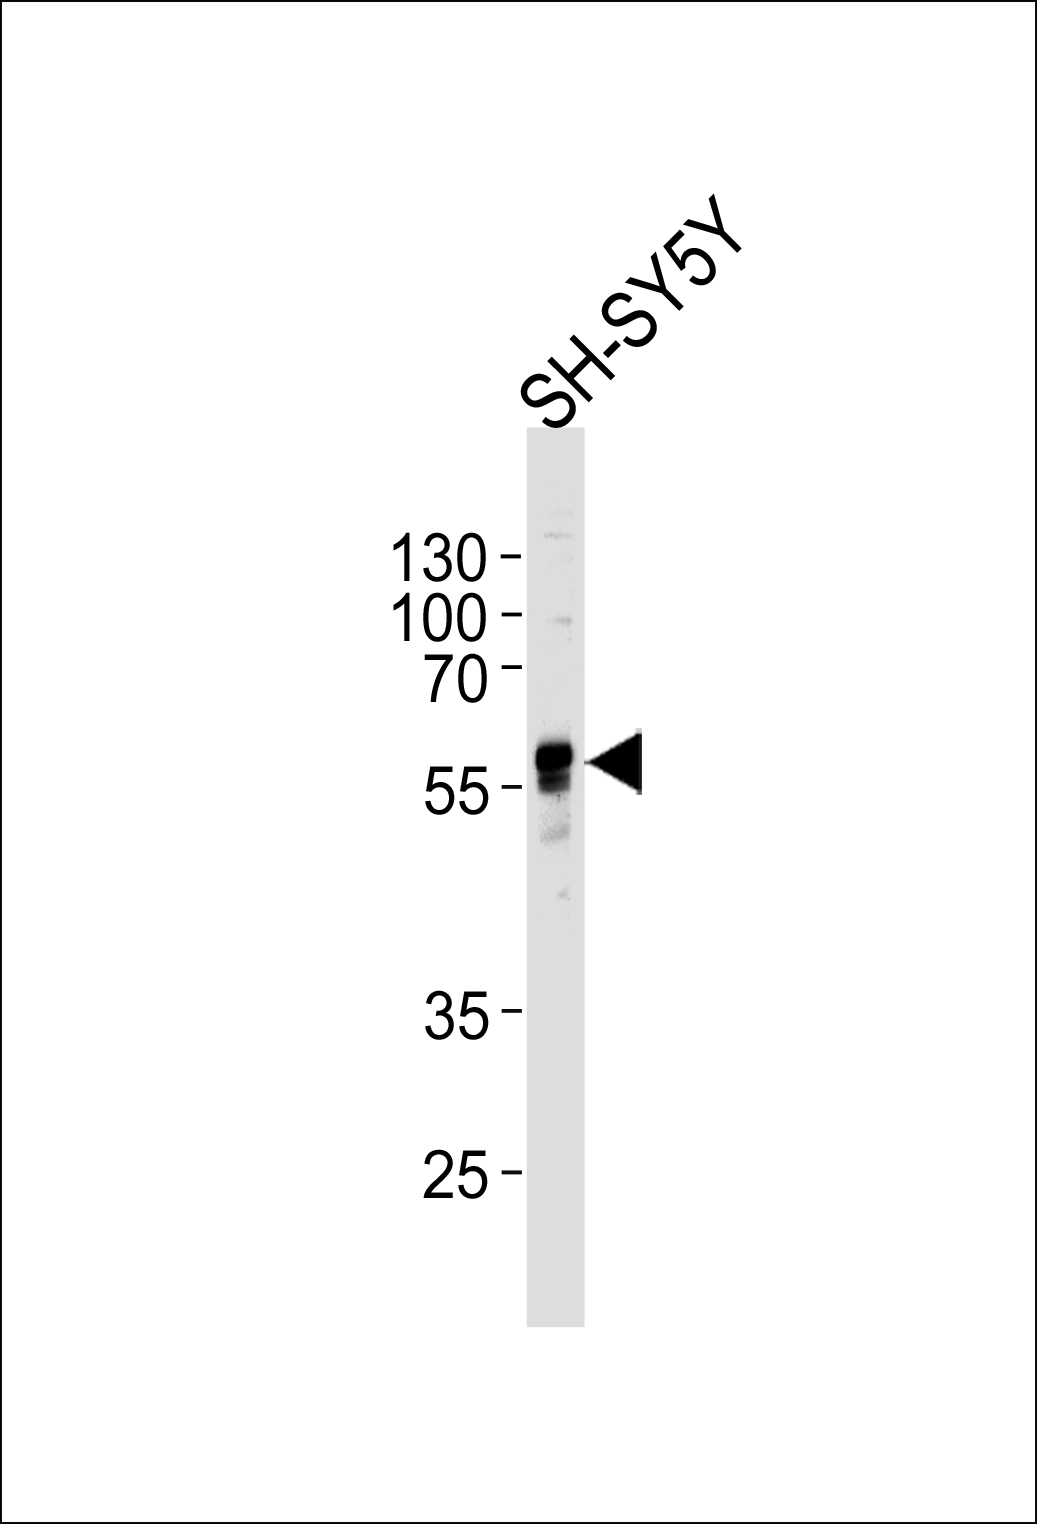 Western blot analysis of lysate from SH-SY5Y cell line, using ABHD3 Antibody (C-term)(Cat. #AP13830b). AP13830b was diluted at 1:1000 at each lane. A goat anti-rabbit IgG H&L(HRP) at 1:5000 dilution was used as the secondary antibody. Lysate at 35ug per lane. 